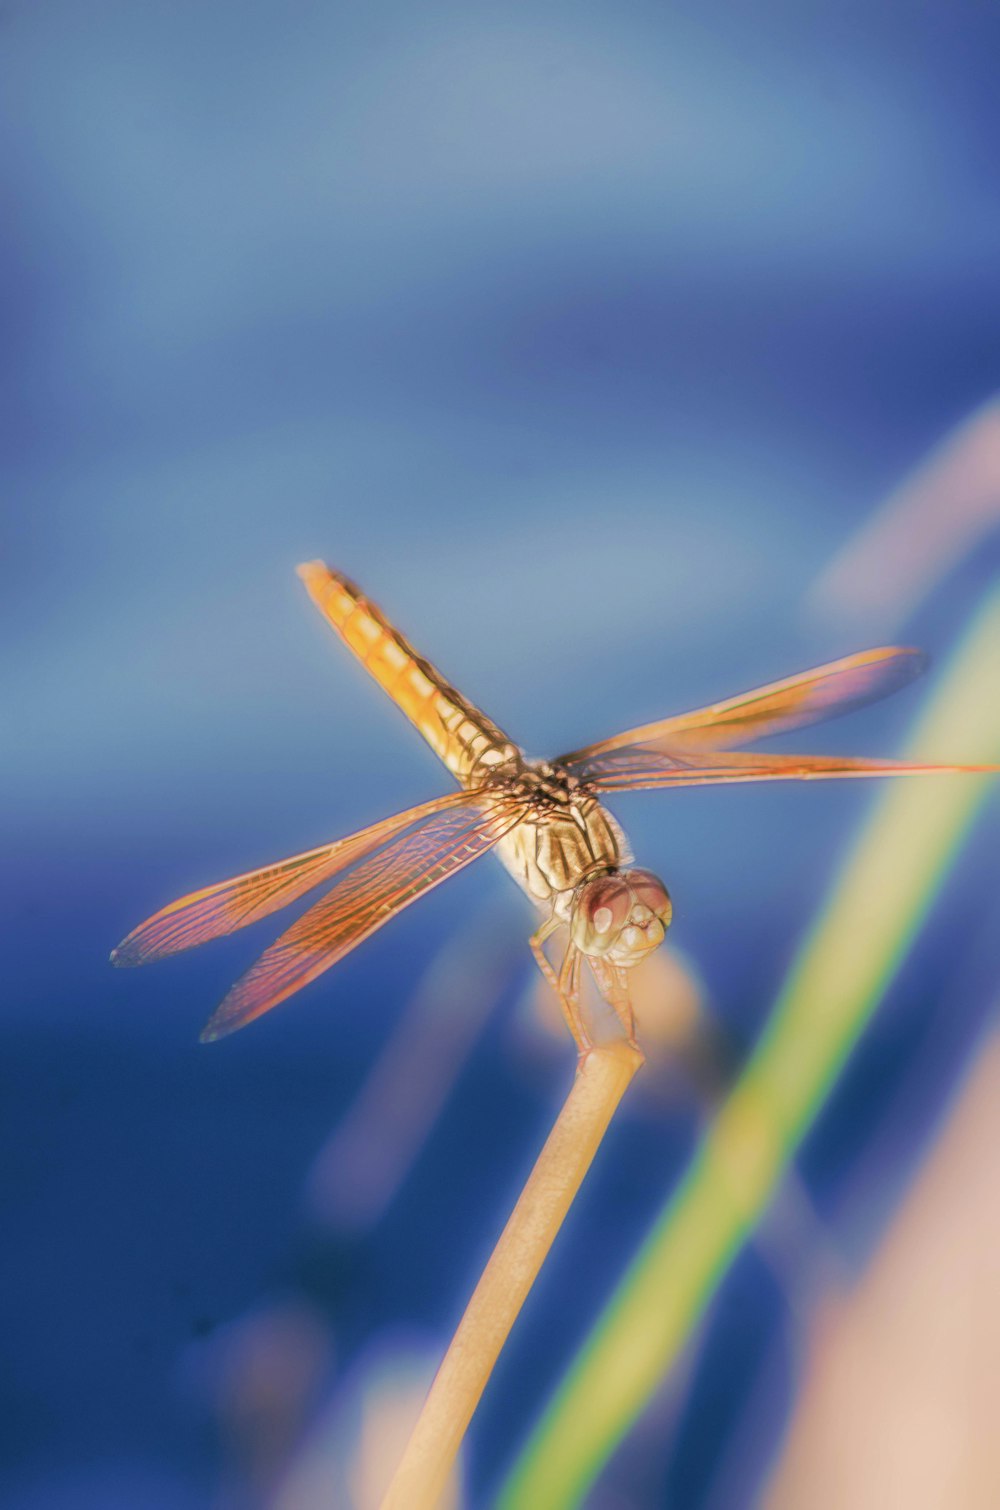 brown and white dragonfly in close up photography